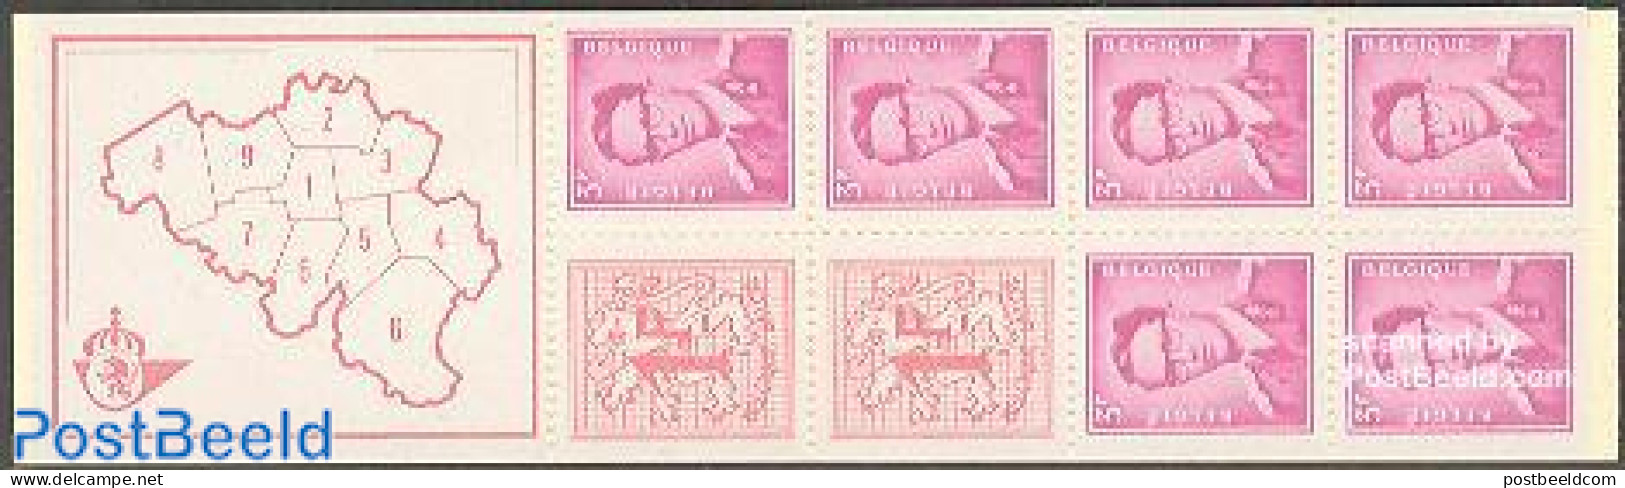 Belgium 1969 Booklet 6x3f, 2x1f, Mint NH, Stamp Booklets - Neufs